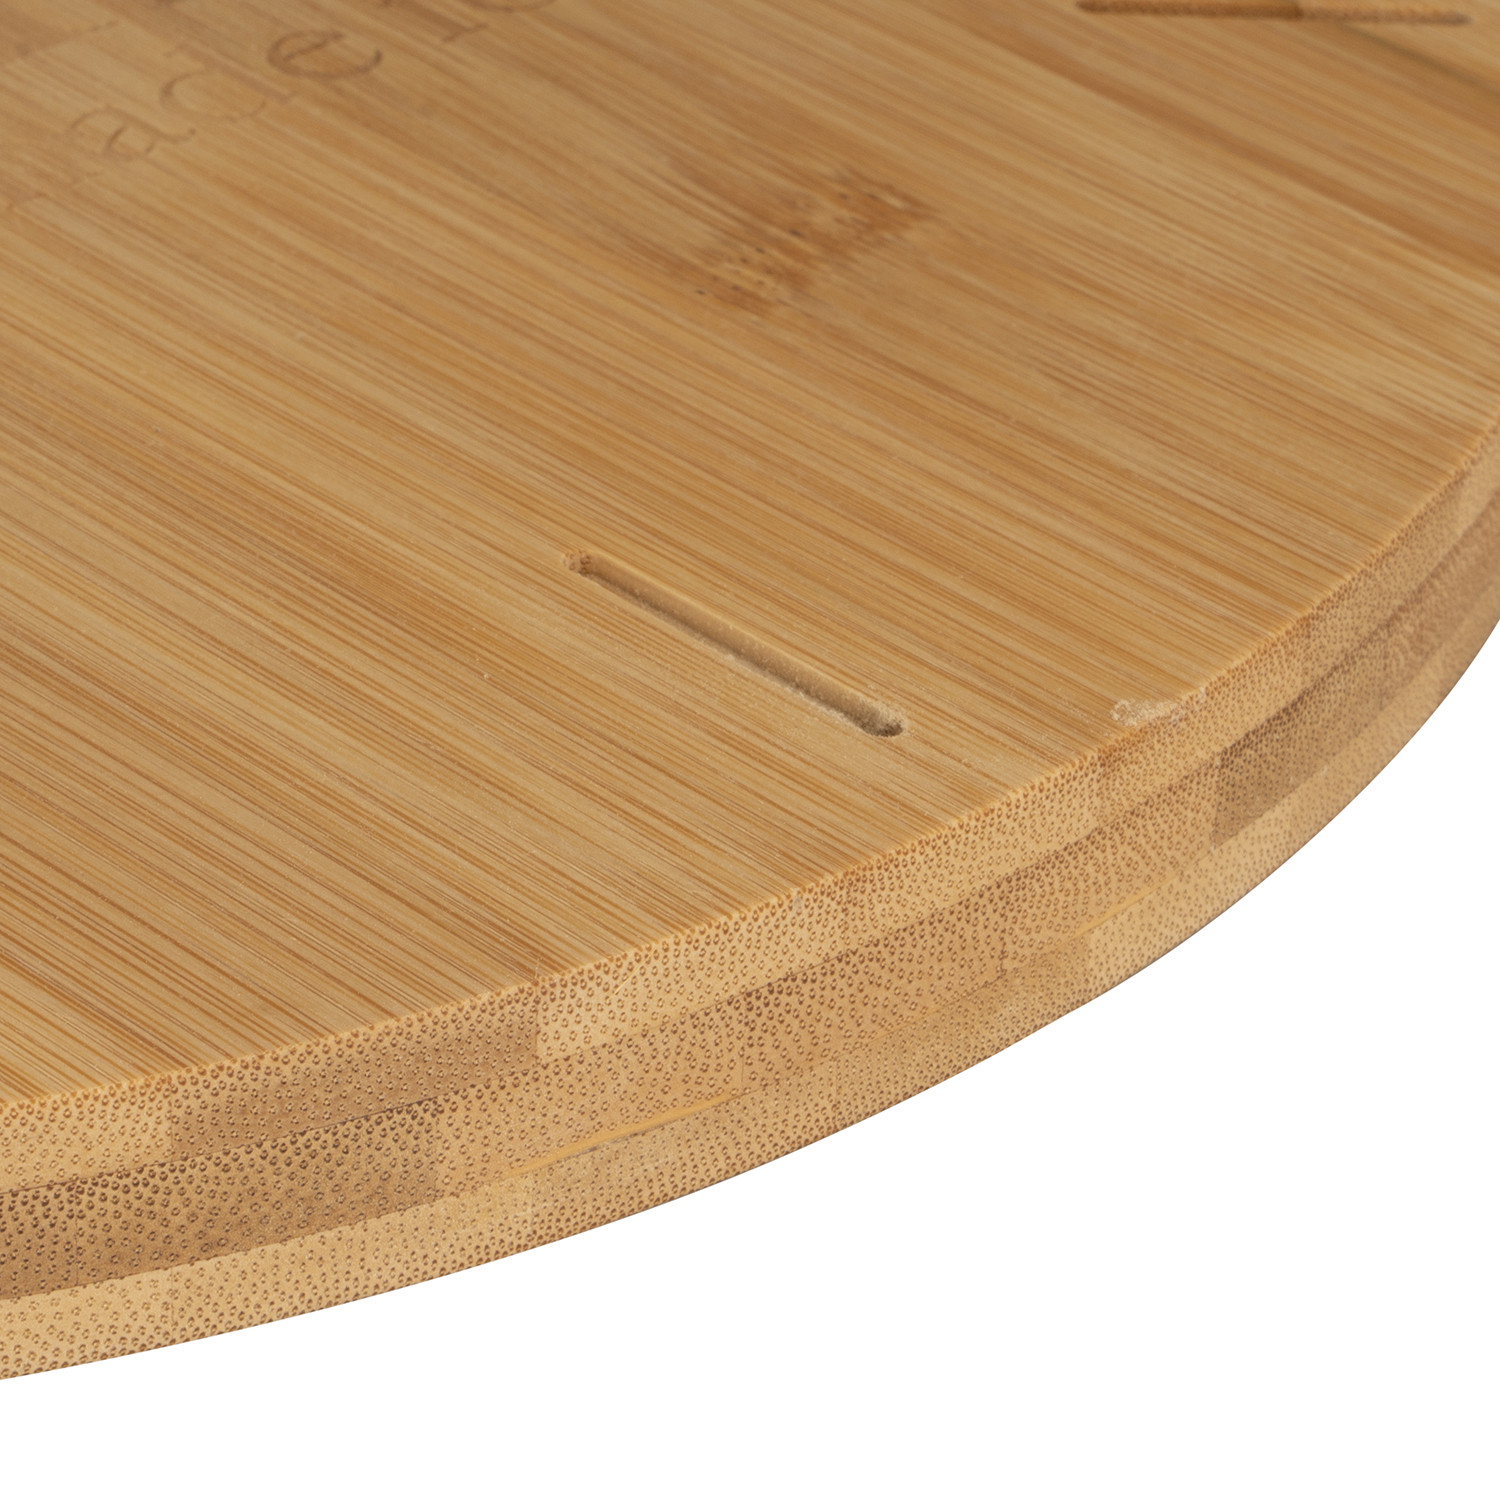 Round Bamboo Large Pizza Board Image 3